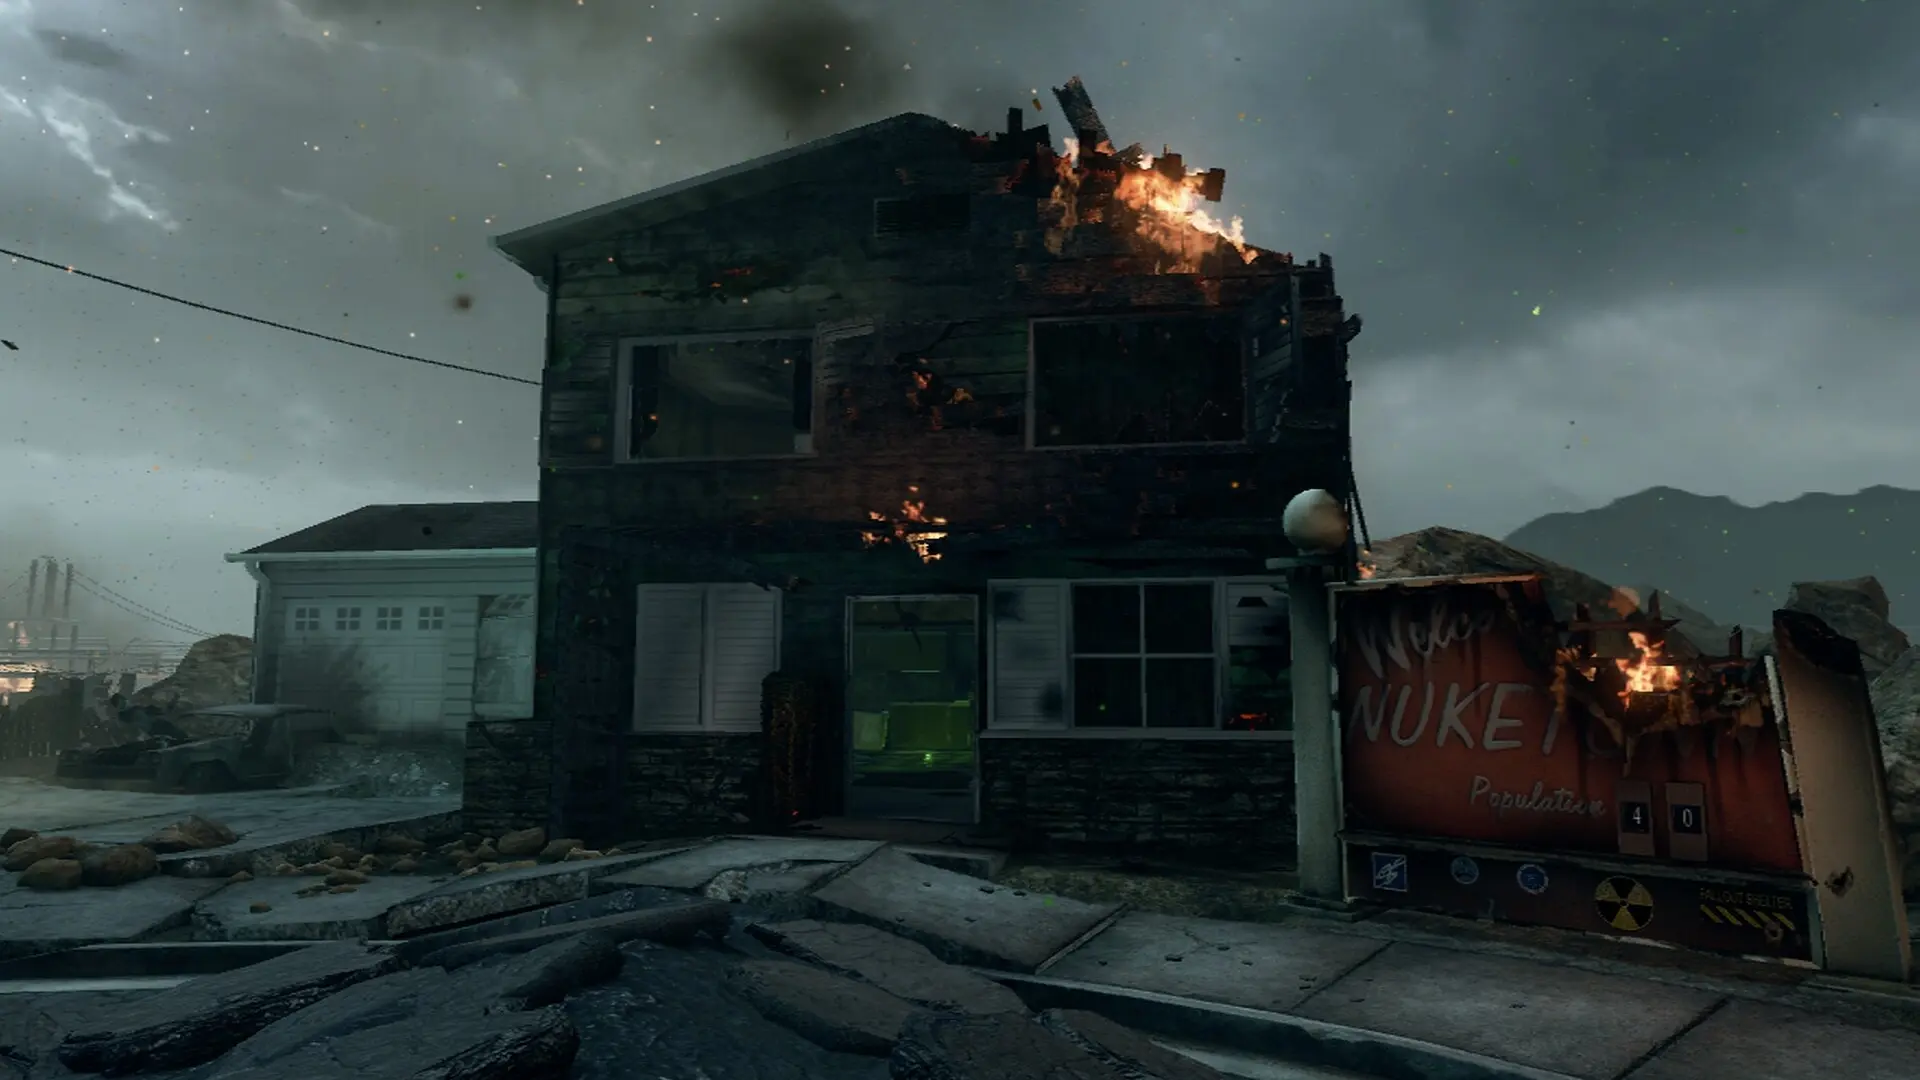 Black Ops 2 Zombies has been revived with new maps and modes